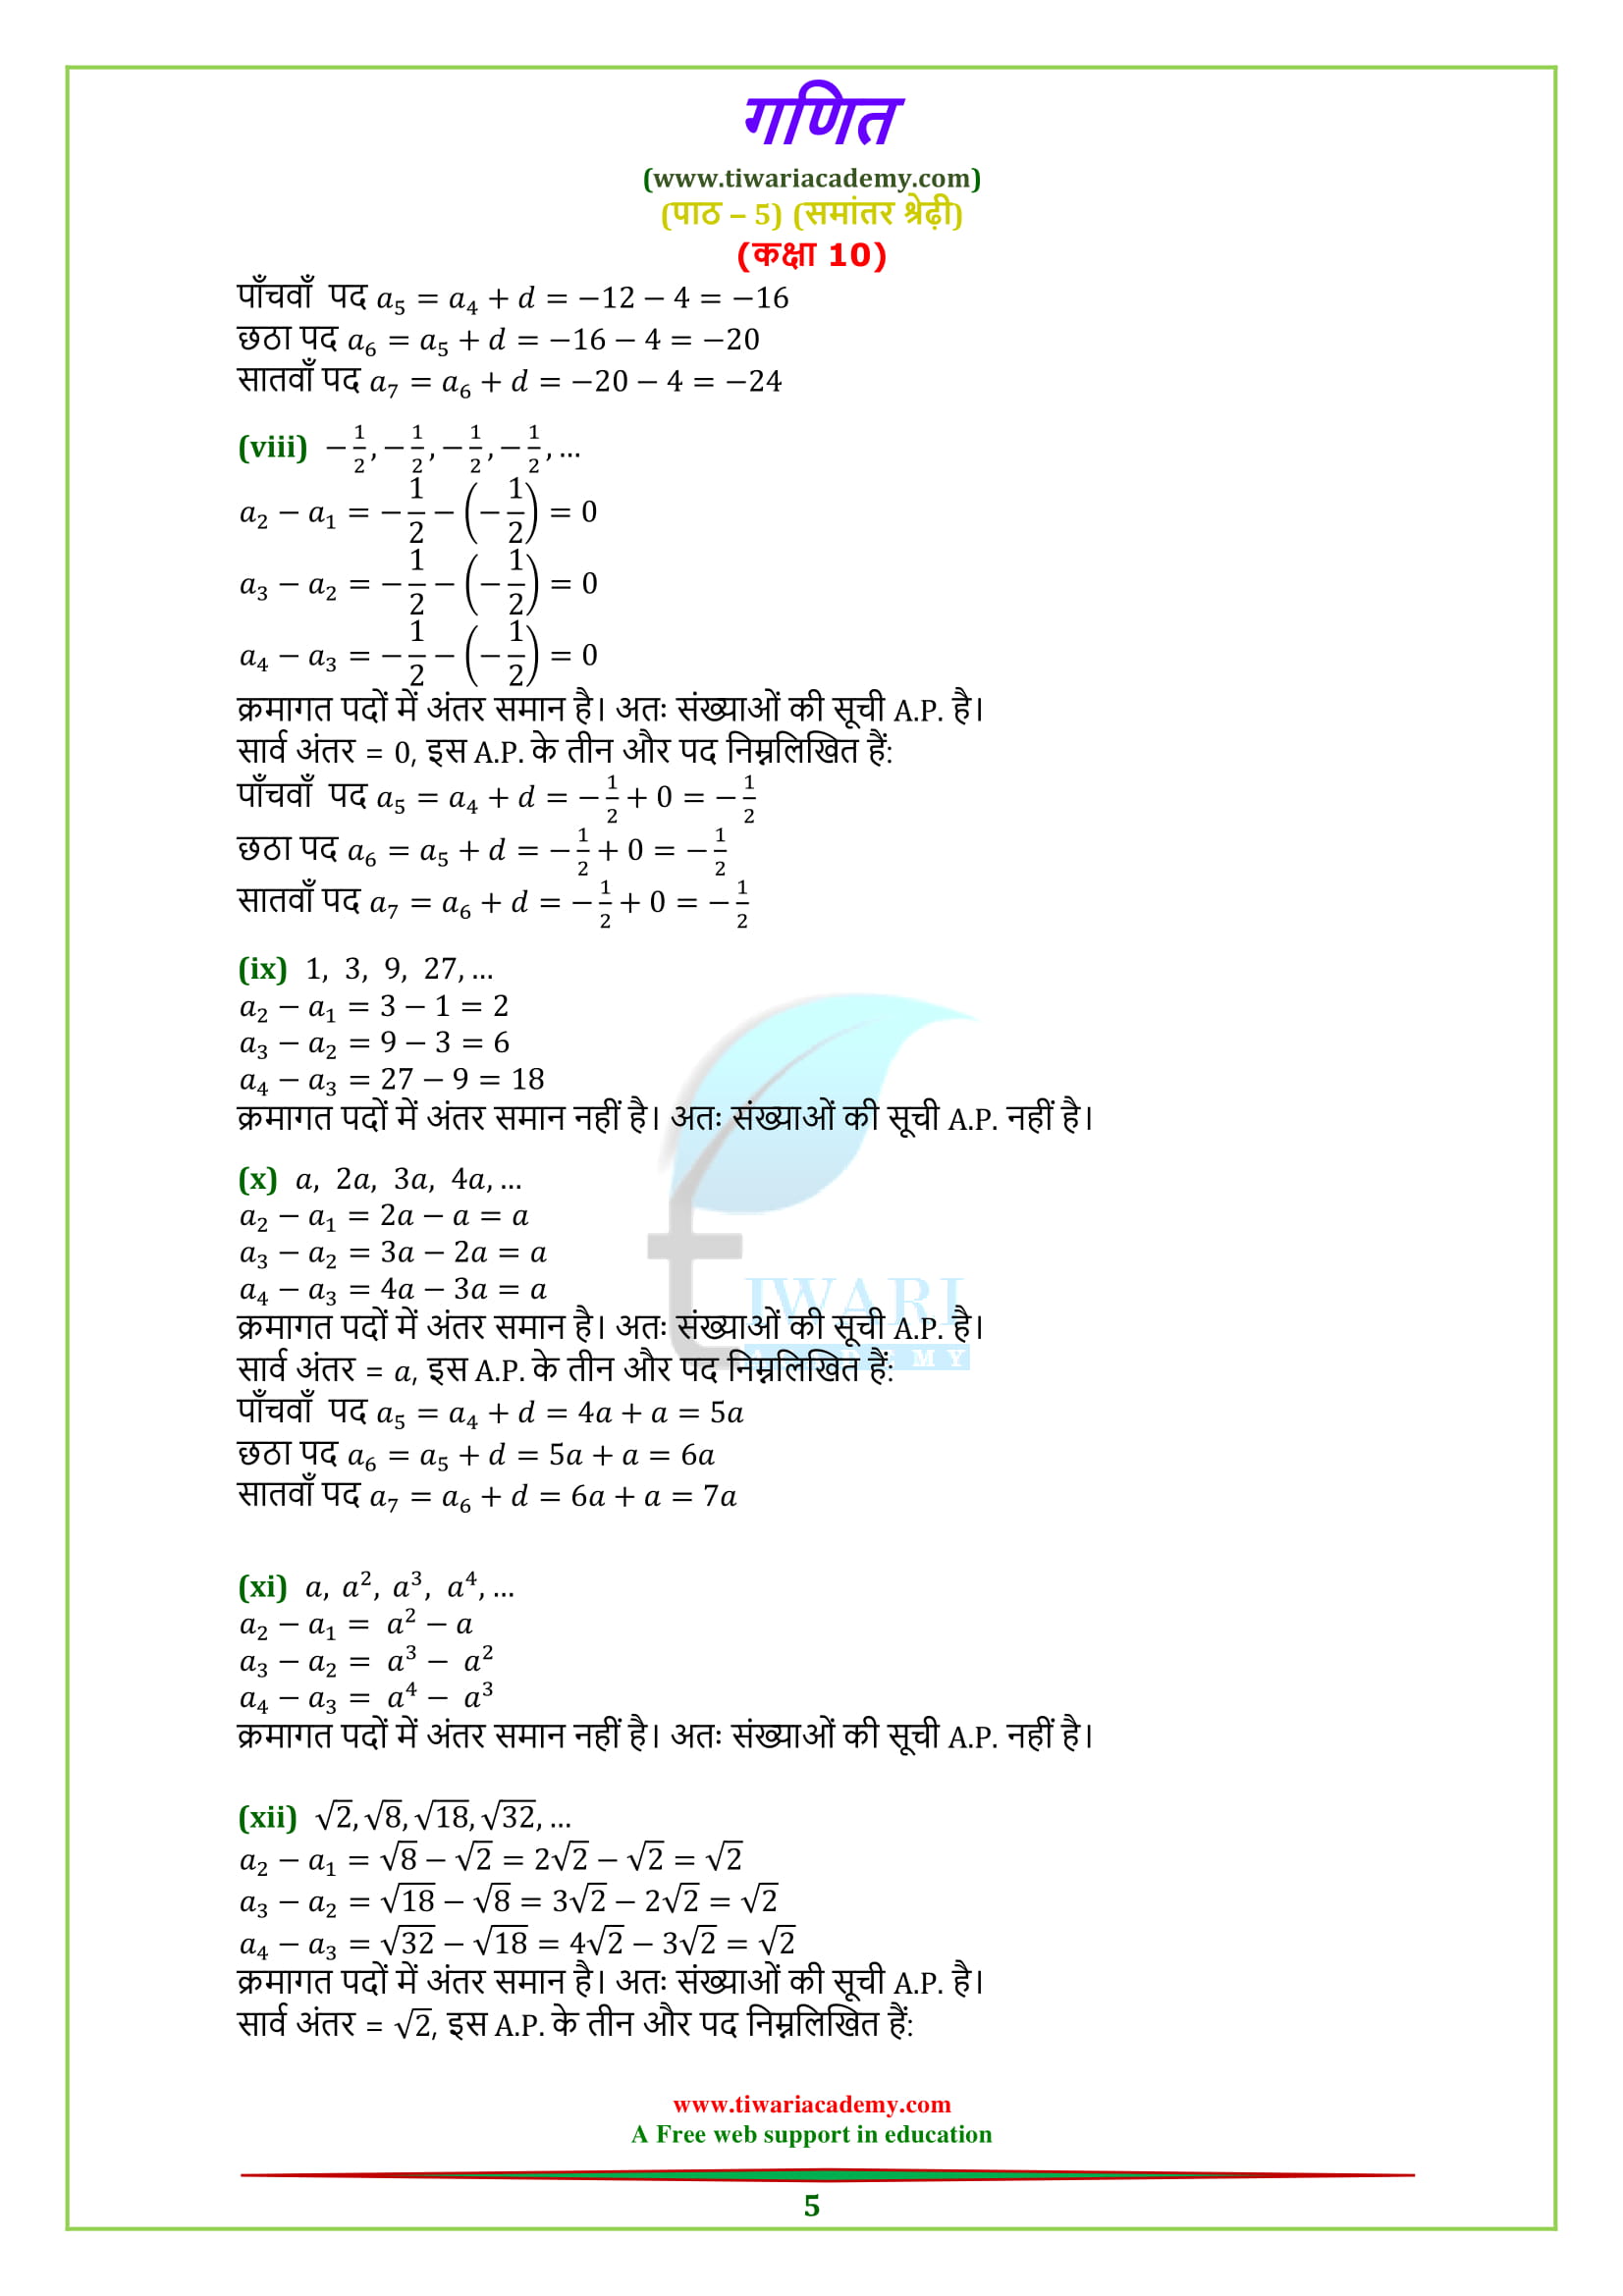 Class 10 Maths Chapter 5 Exercise 5.1 Solutions for UP Board in Hindi